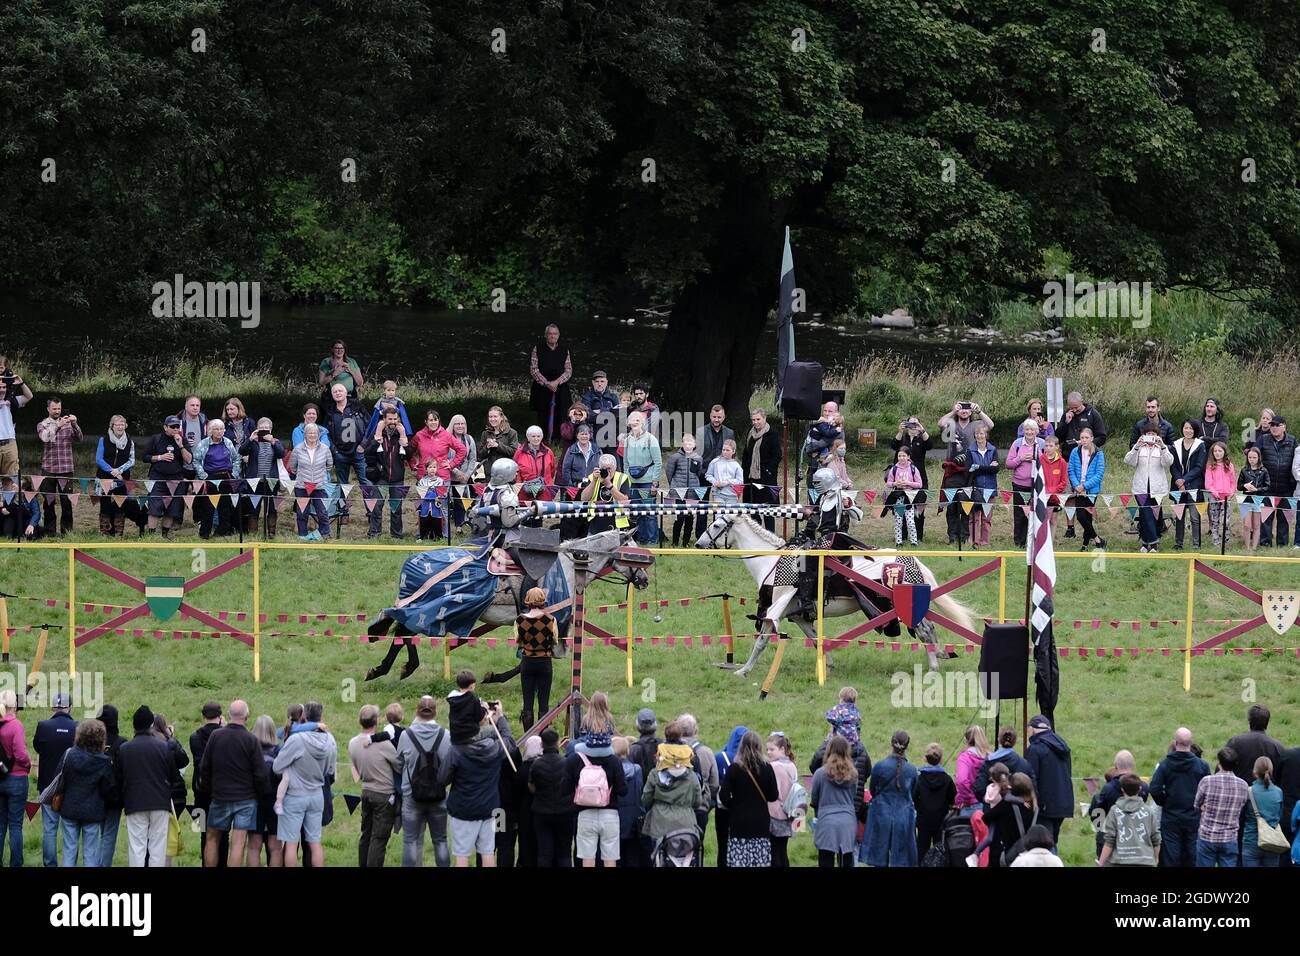 Melrose, Scotland, UK. 15th Aug, 2021. Les Amis, jousting knights & horsemanship display from the medieval period, in tribute to Sir Walter Scotts 'Ivanhoe' The inaugural festival, ScottFest 2021, is being held at Abbotsford, Scott's home in the Scottish Borders, over the legendary author's 250th birthday weekend, Saturday August 14th and Sunday August 15th. The event, funded this year by EventScotland, is based on Ivanhoe and will feature jousting, stunt horse riding, living history displays, falconry and traditional crafts, plus archery, live music and Scottish dancing. Rob Gray Stock Photo